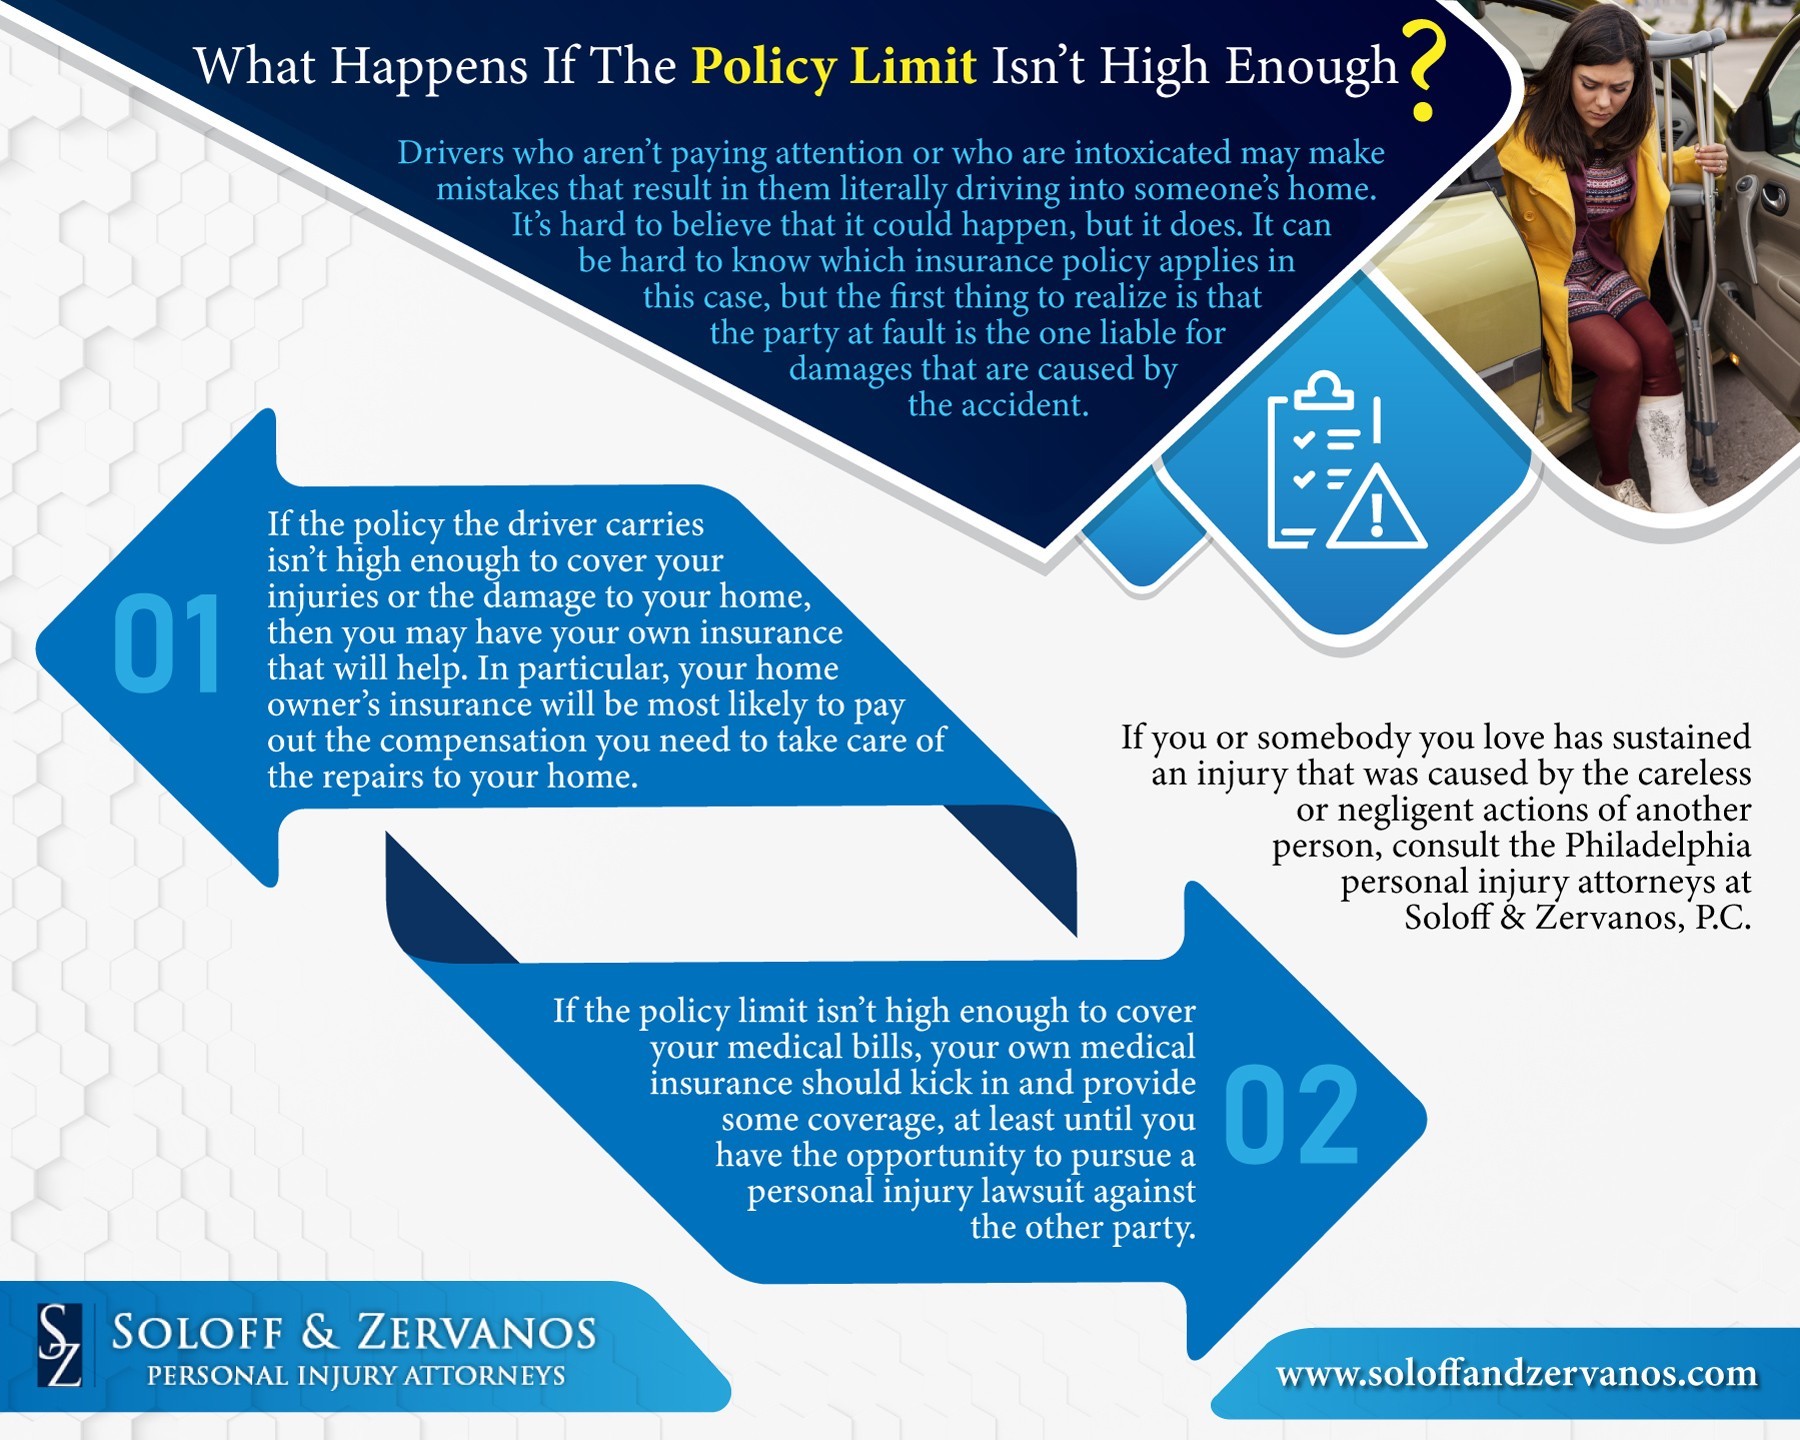 What Happens If The Policy Limit Isn’t High Enough?